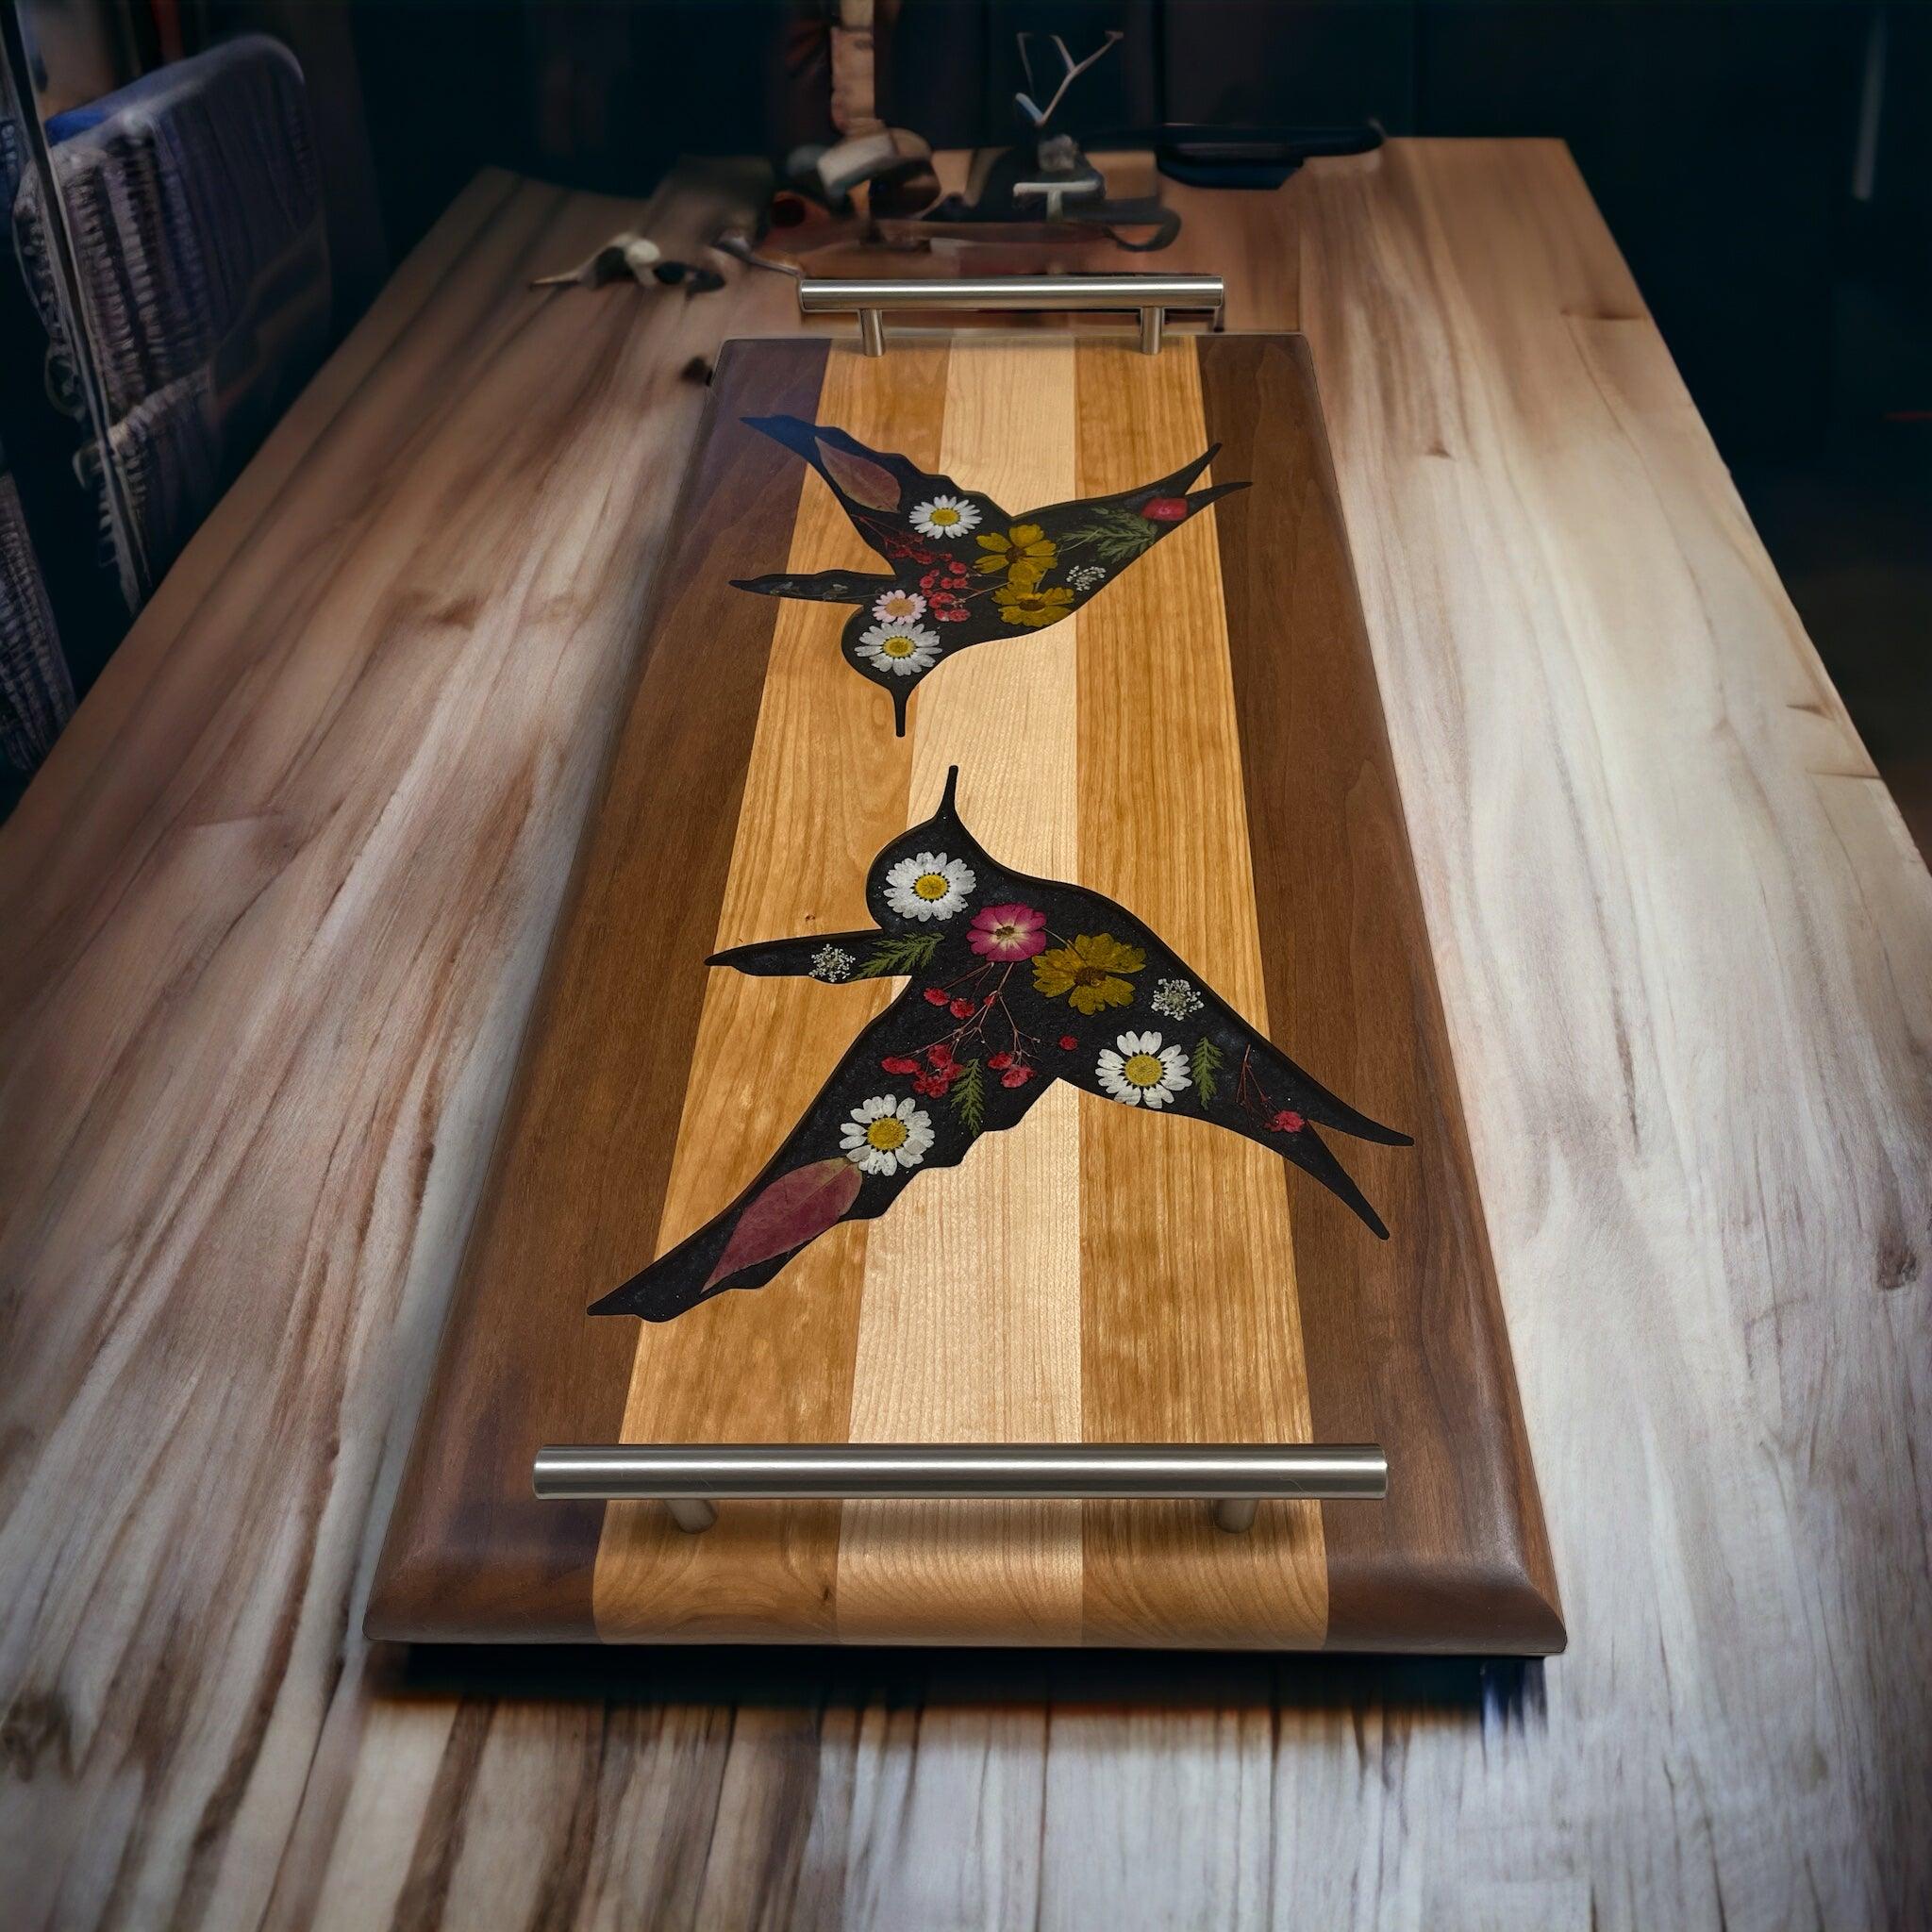 Hummingbird serving board - We have the wood